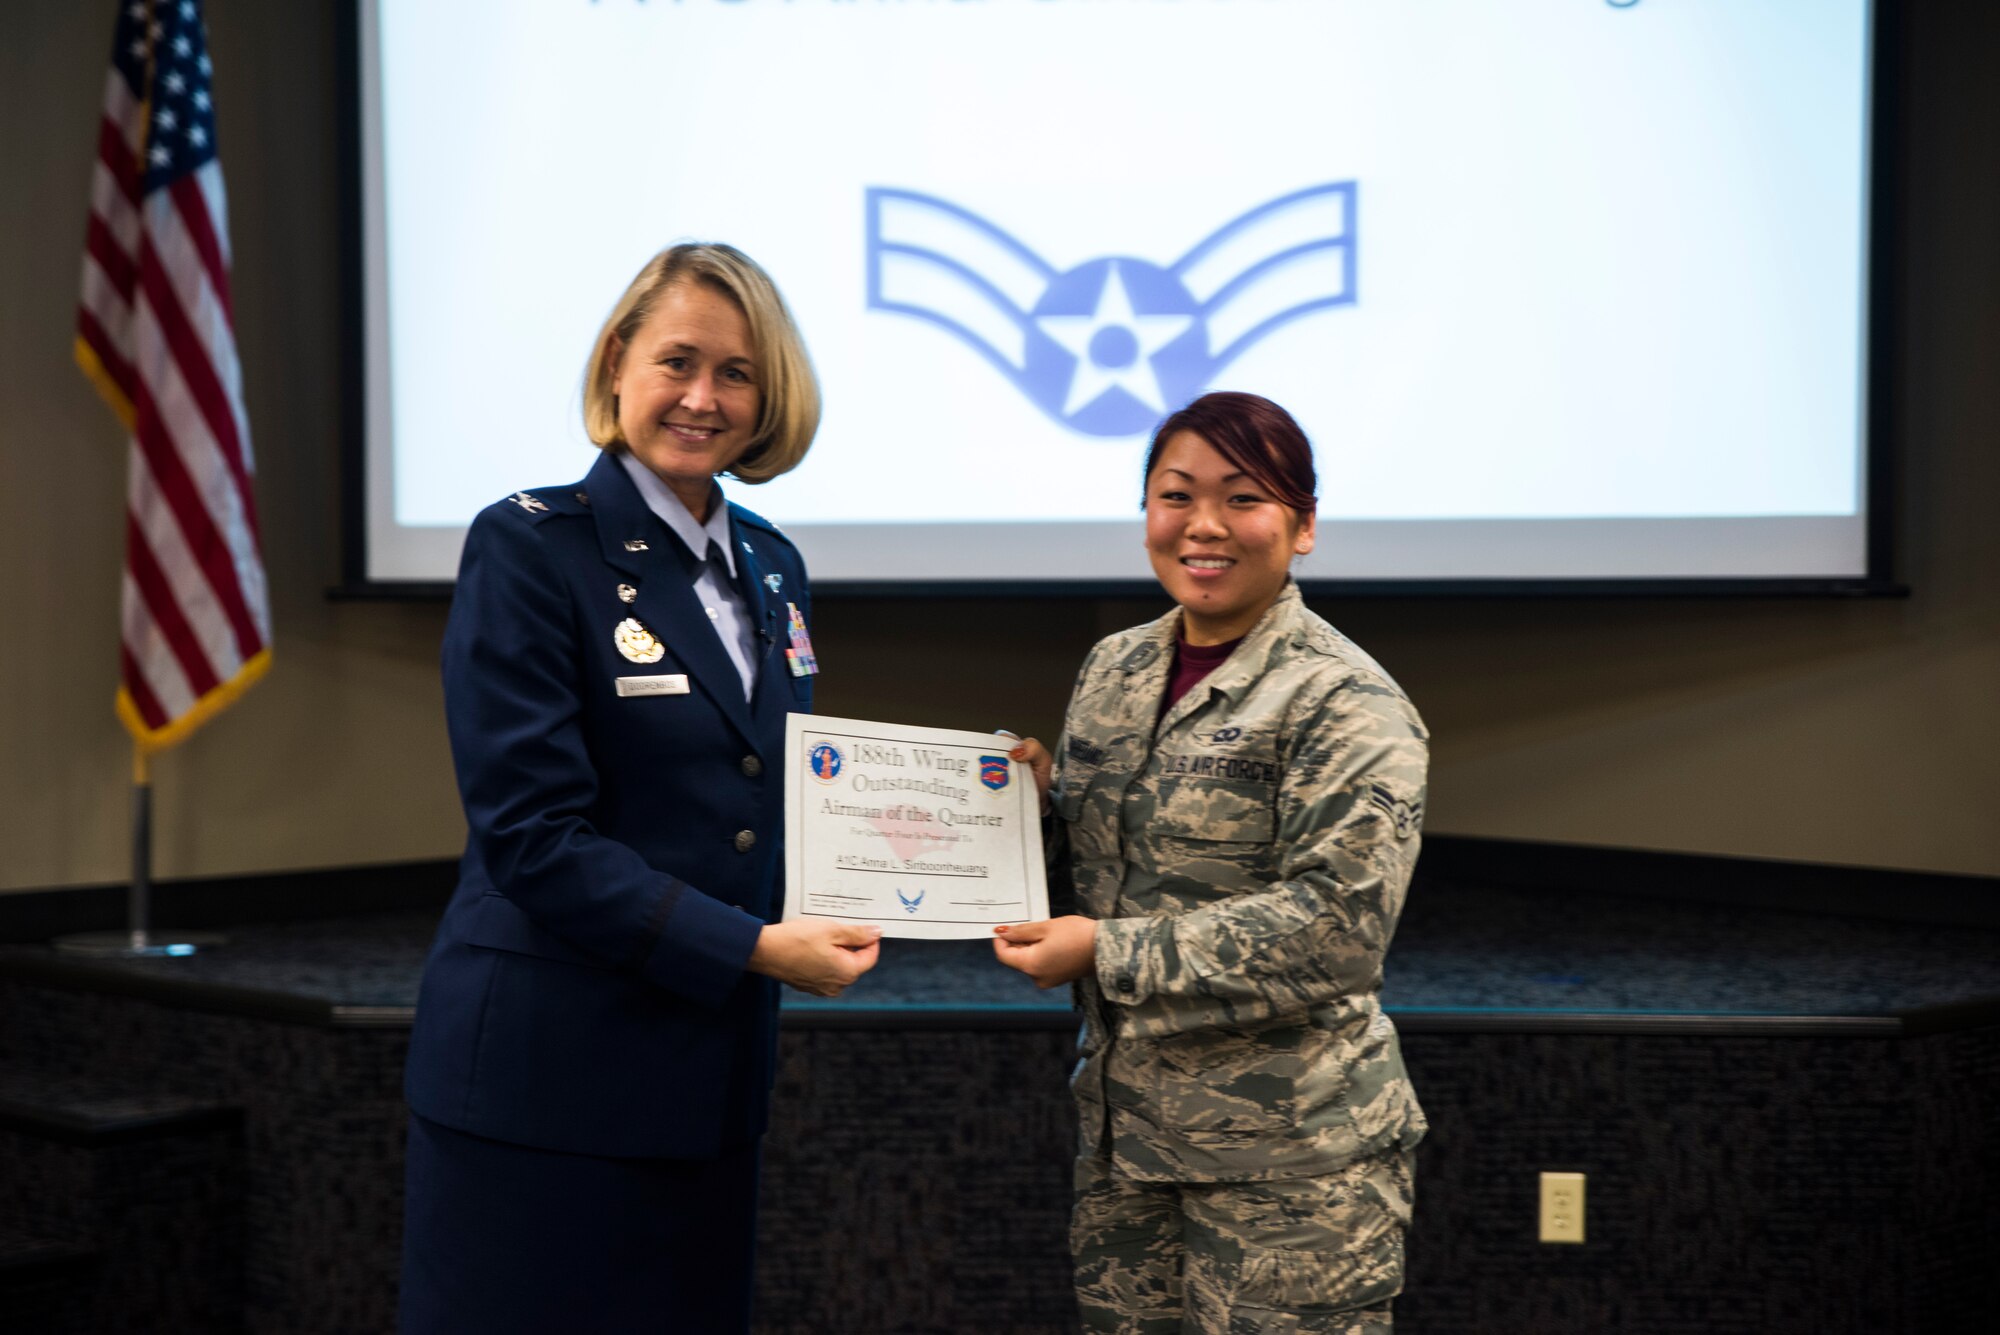 Senior Airman Anna Siriboonheuang, 188th Operations Support Squadron, is awarded the Outstanding Airman of the Quarter award Nov. 5, 2016, for the final quarter of fiscal year 2016 at Ebbing Air National Guard Base, Fort Smith, Ark. The Outstanding Airman of the Quarter program promotes professional development, innovation and mission success by recognizing those who excel in their carrier fields while fostering the cultivation of ready, responsive and highly-skilled Airman. The award was presented to Siriboonheuang by Col. Bobbi Doorenbos, 188th Wing commander. (U.S. Air National Guard photo by Senior Airman Cody Martin)